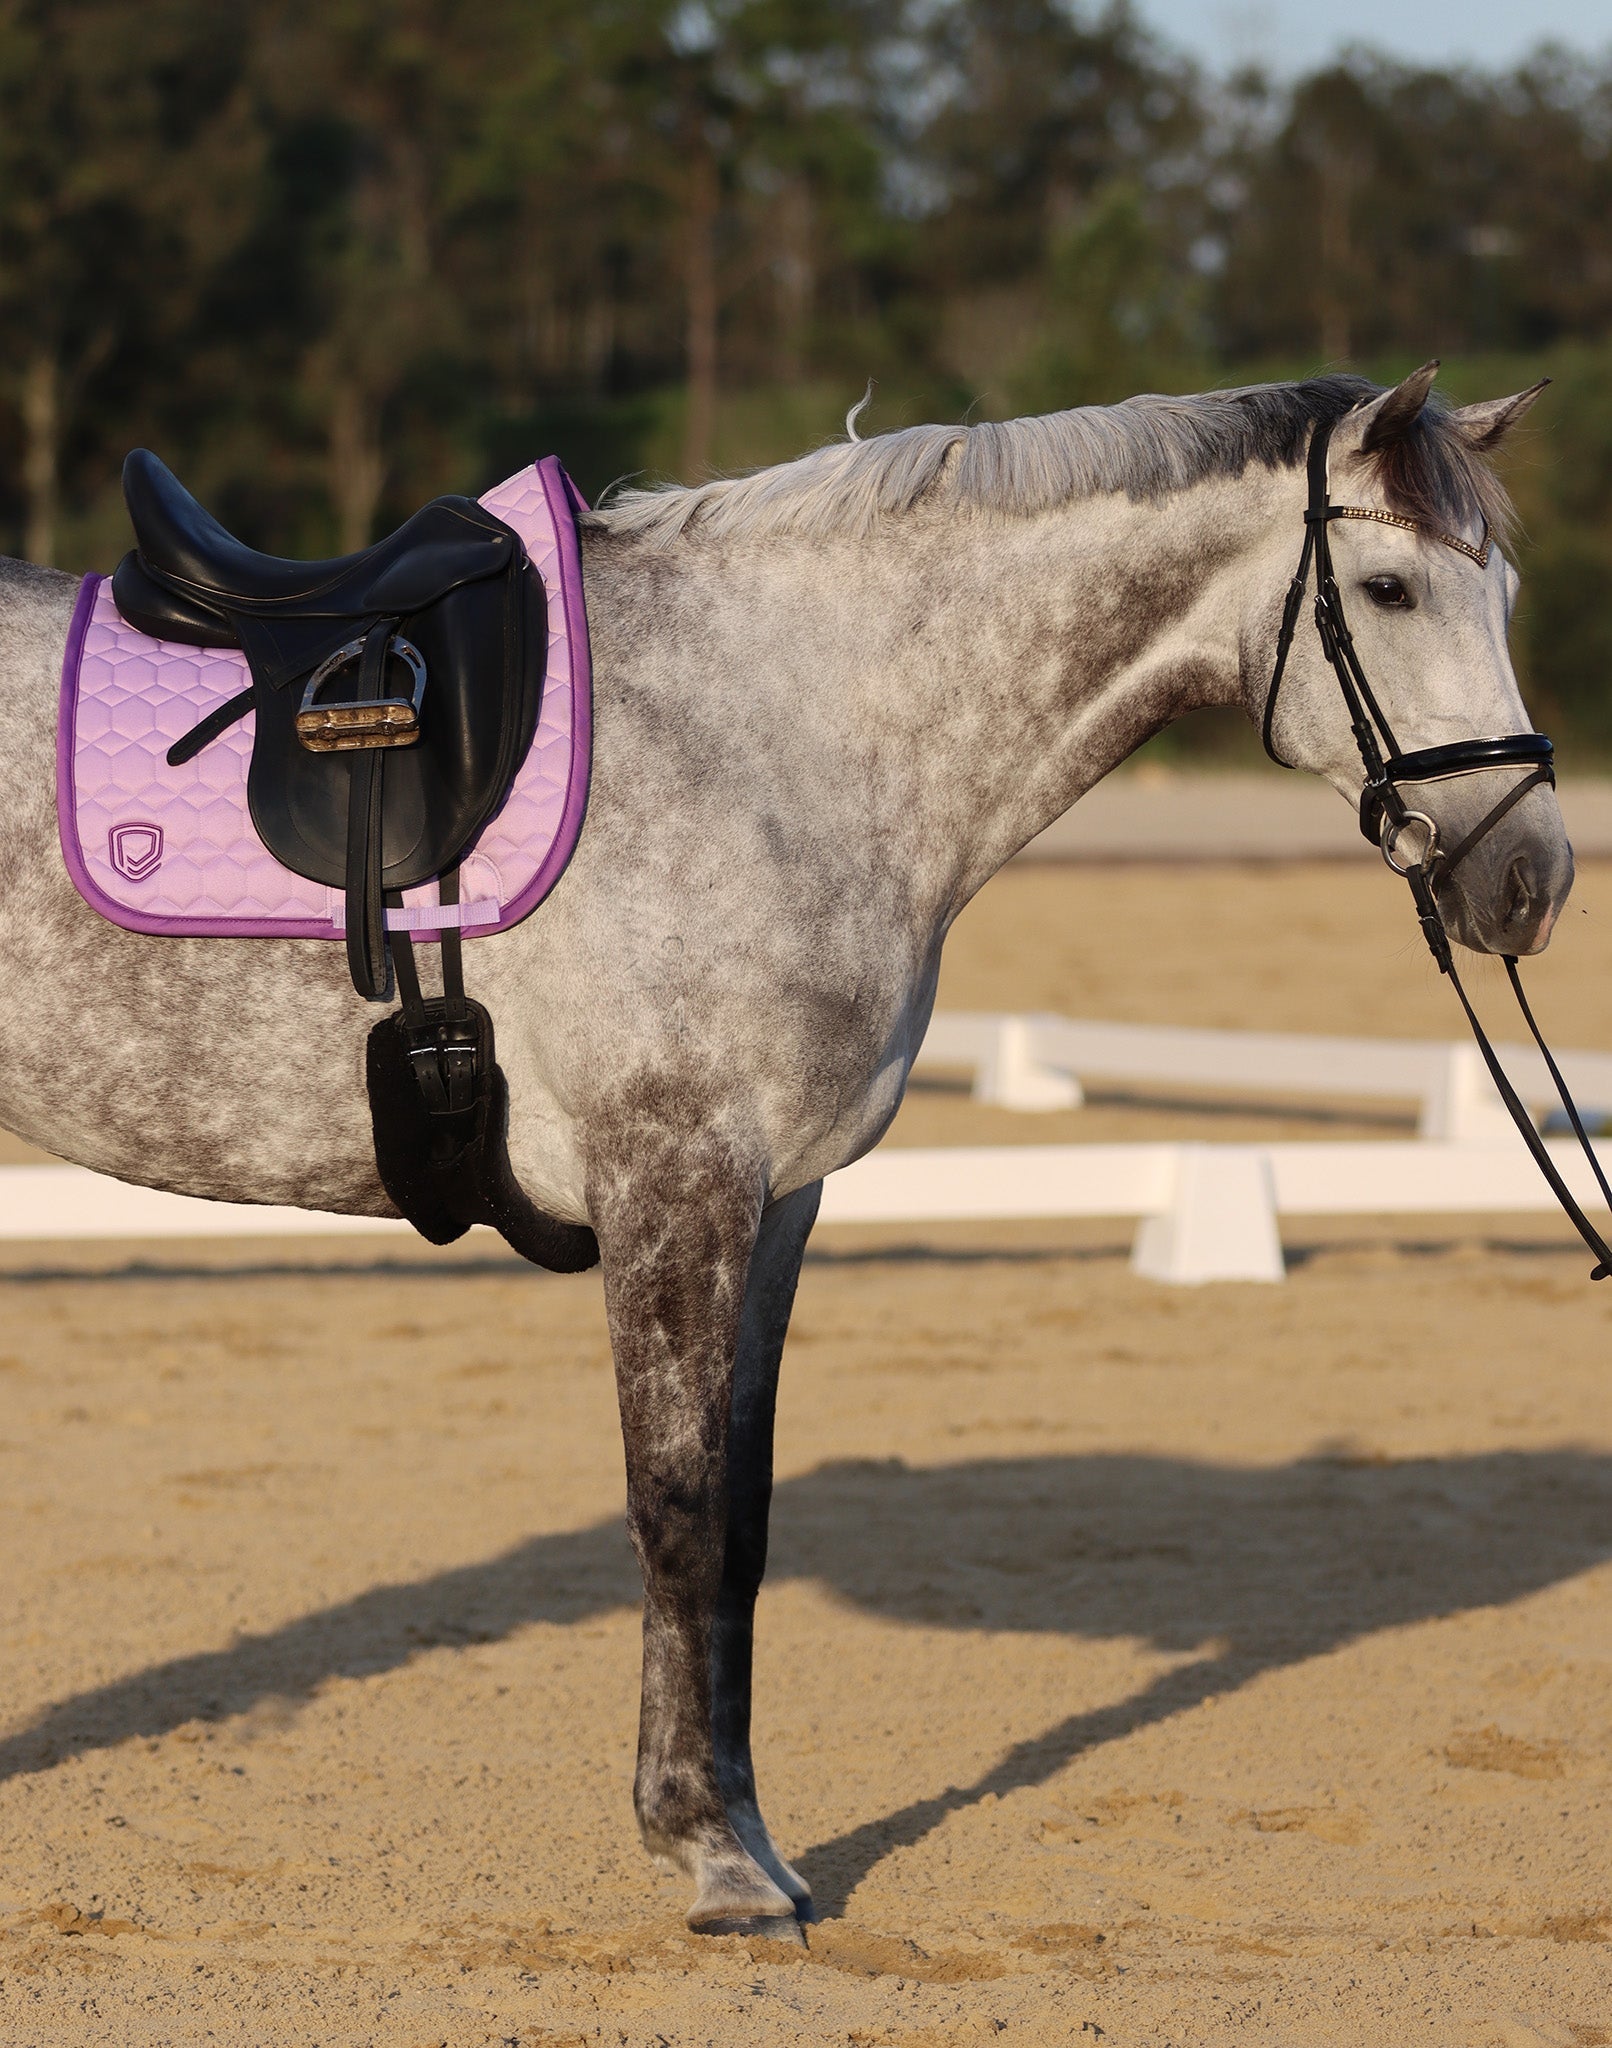 Recycled Dressage Saddle Pad - Lilac - Equiluxe Tack